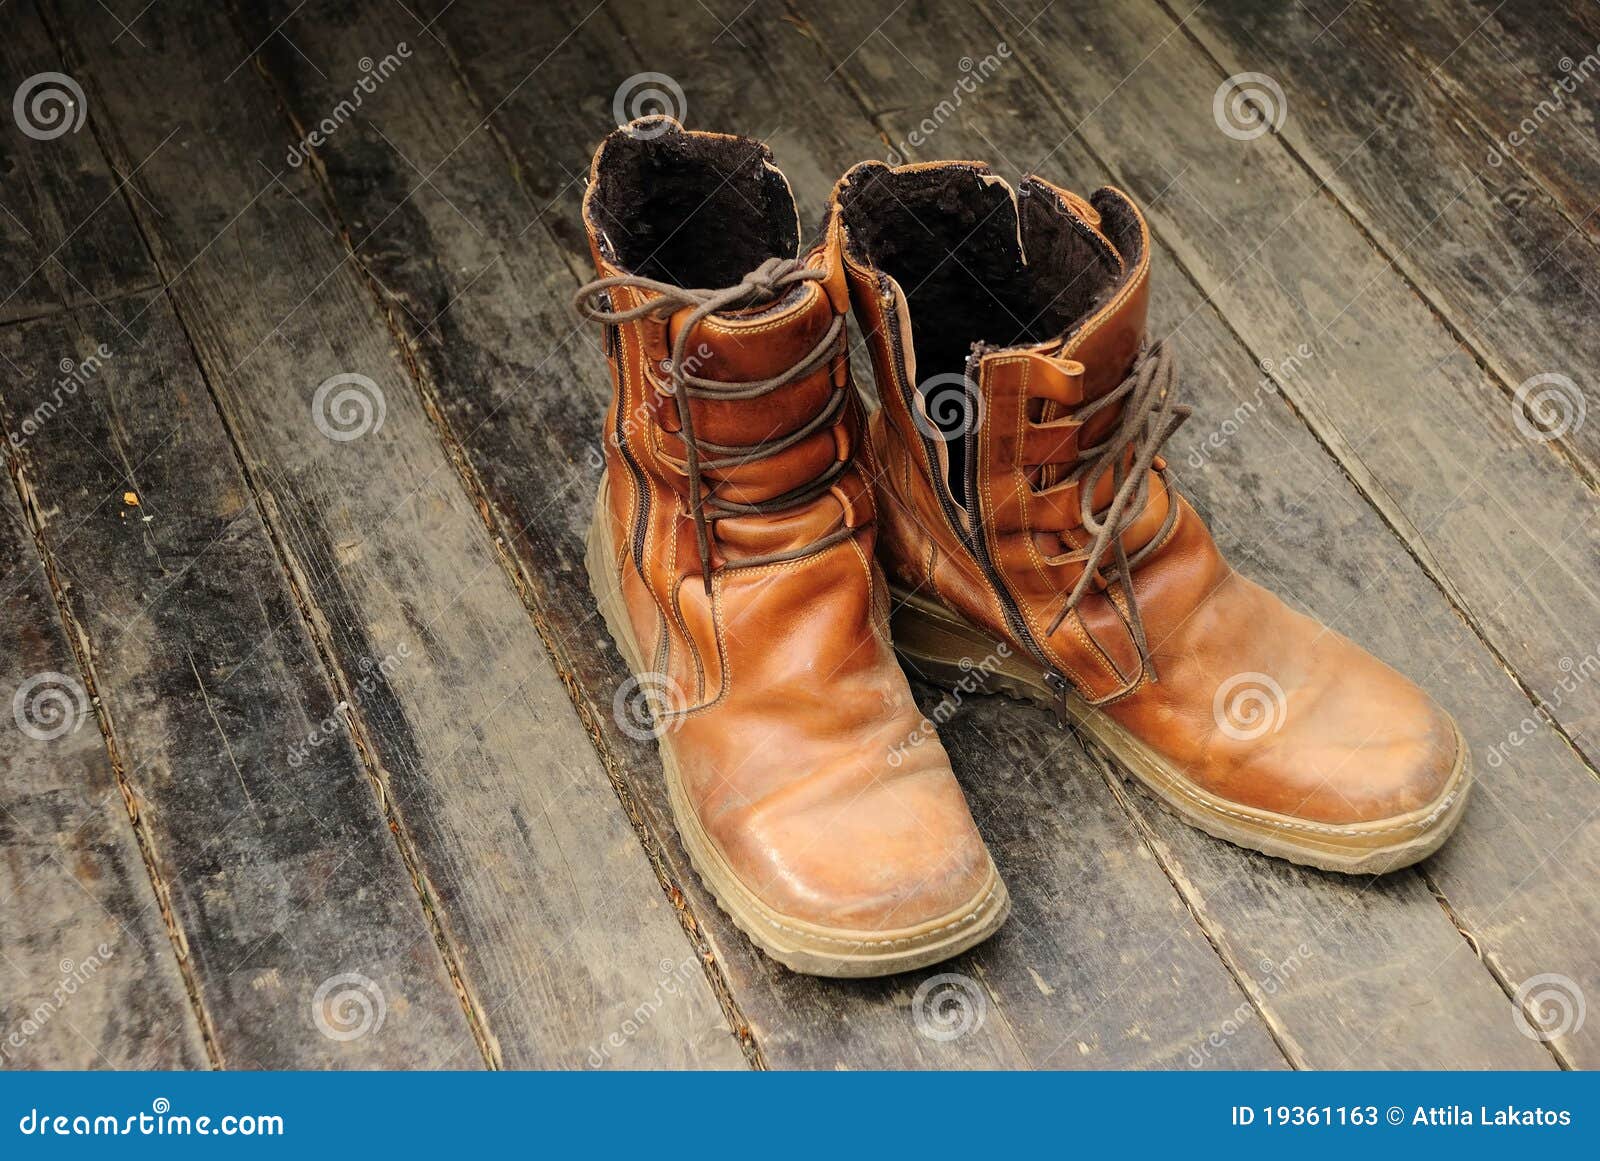 Hiking Boots on Wooden Floor Stock Image - Image of leather, trekking ...